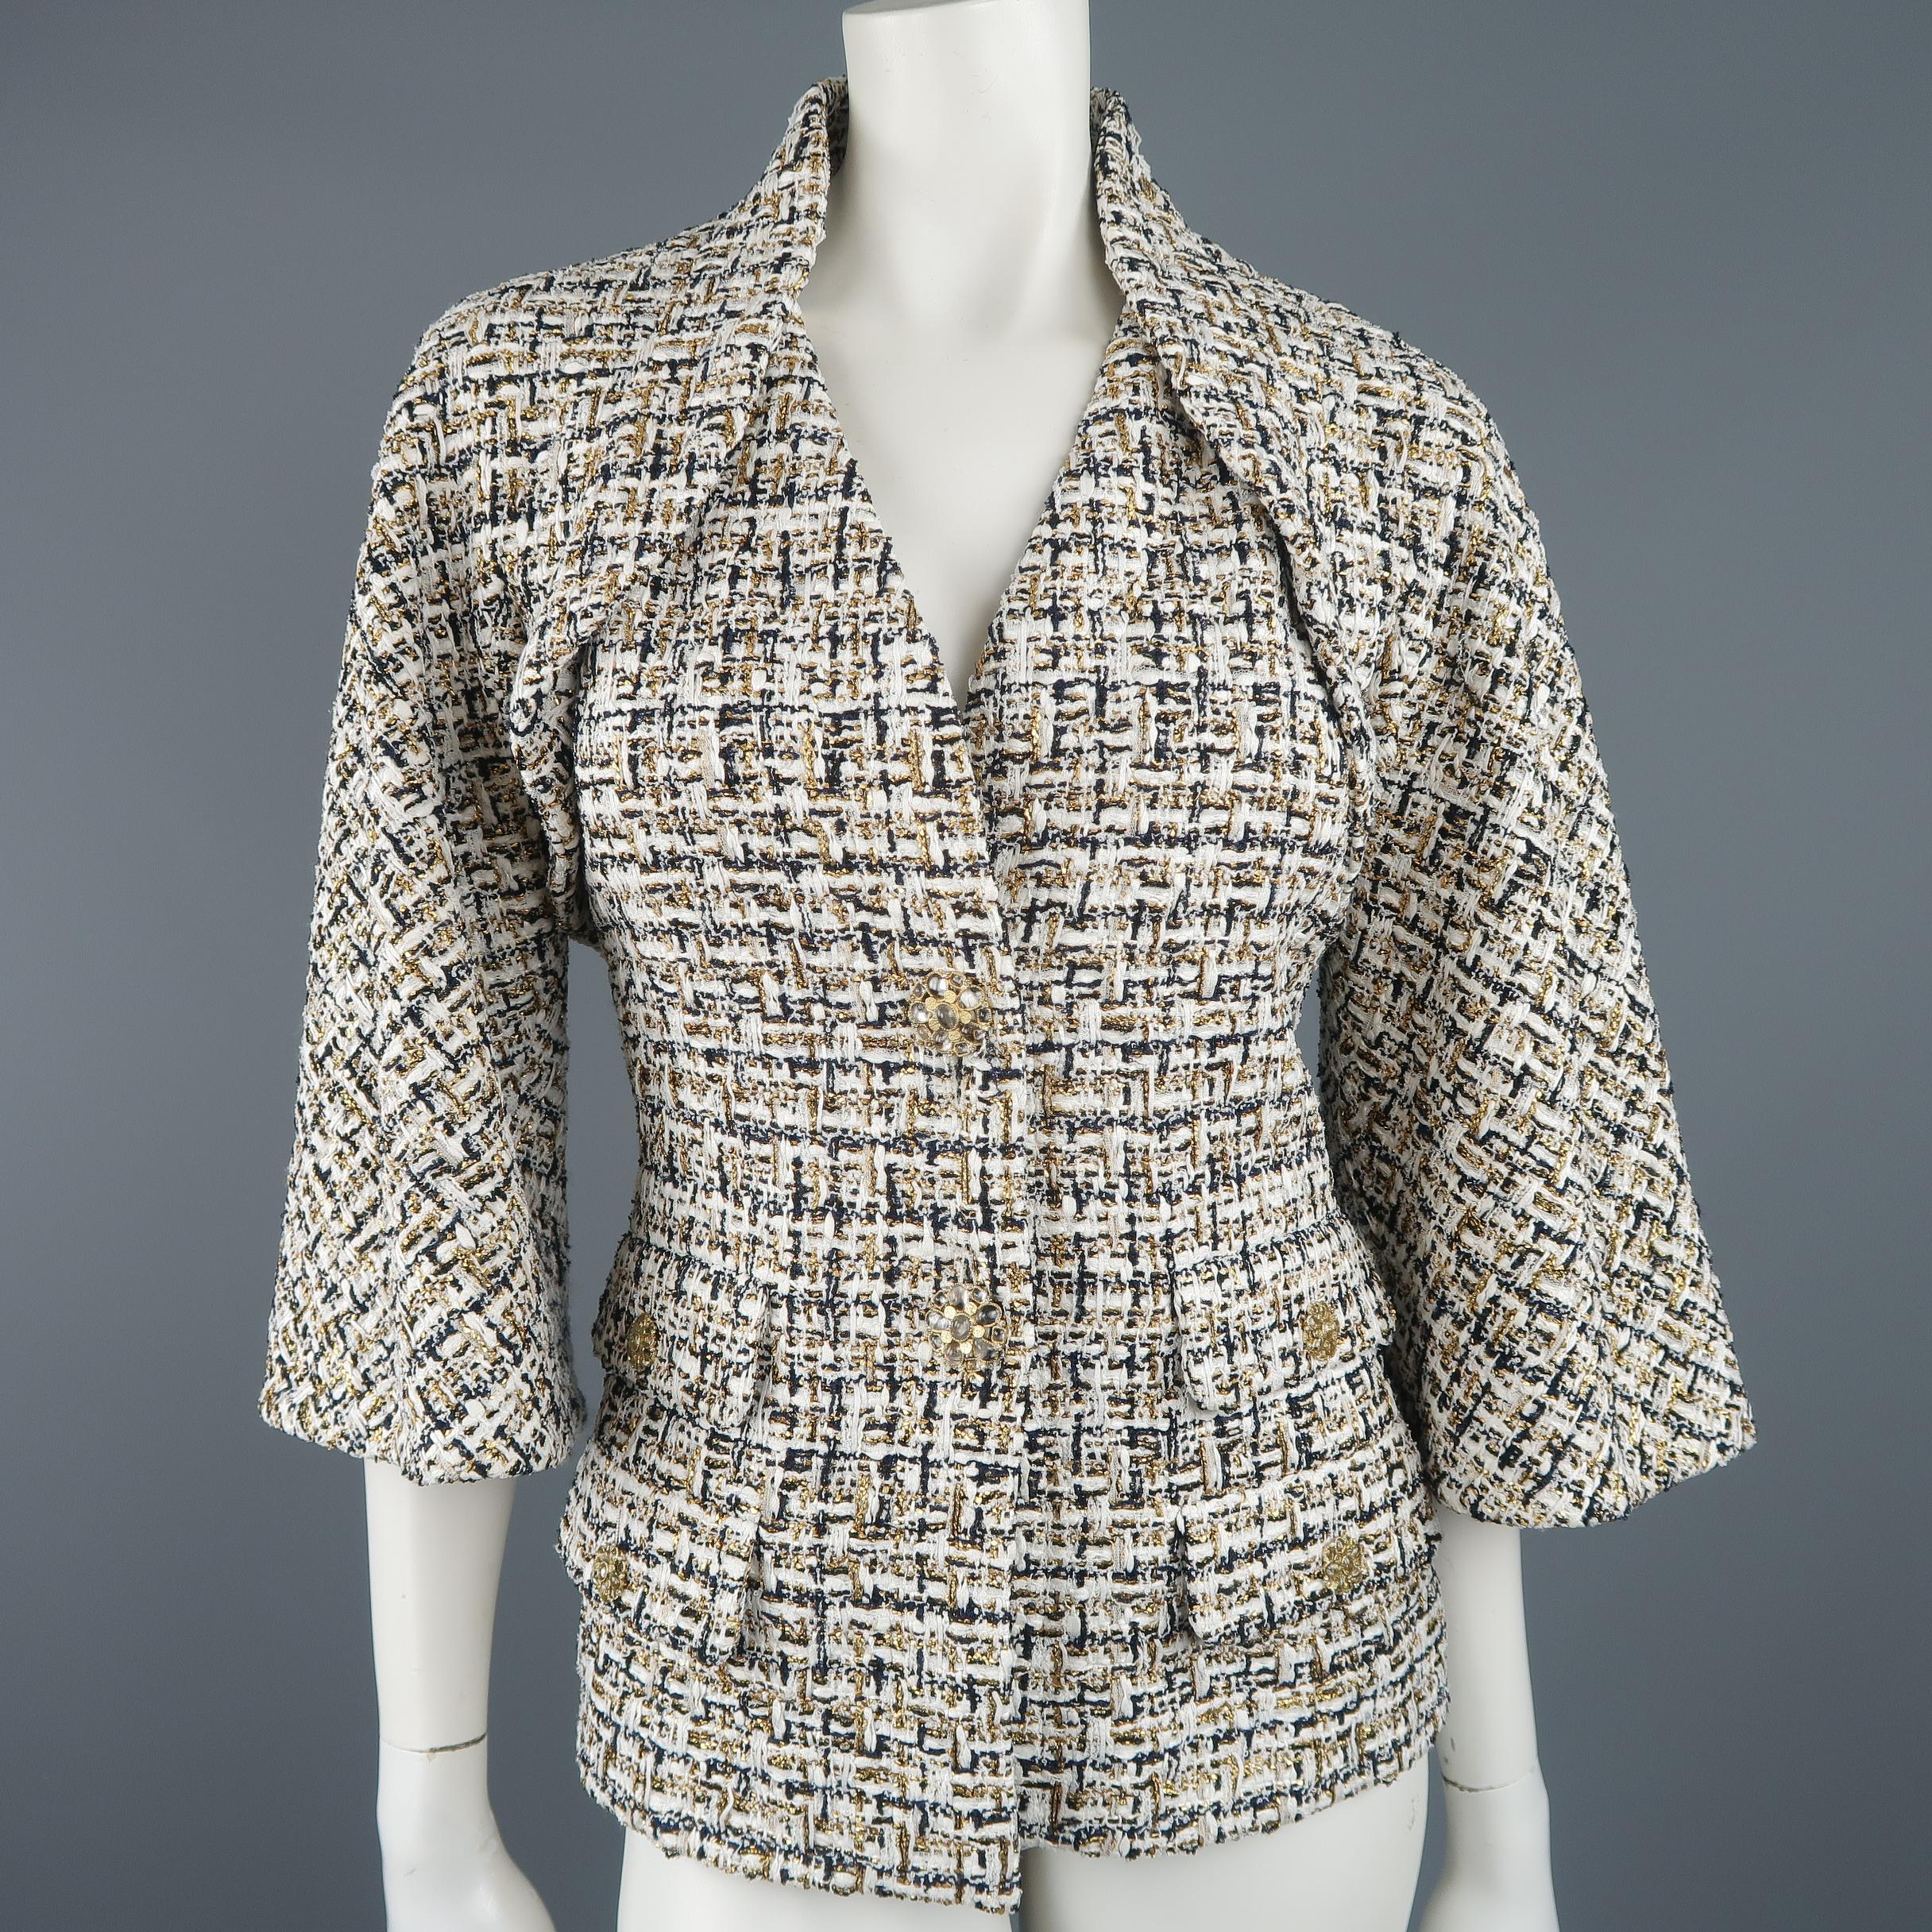 This gorgeous Chanel jacket comes in white tweed with navy blue and metallic gold weave pattern and features a v neckline,  bolero effect overlay, cropped bell sleeves, gorgeous gold tone metal flower jewelry buttons with clear gems, and four flap